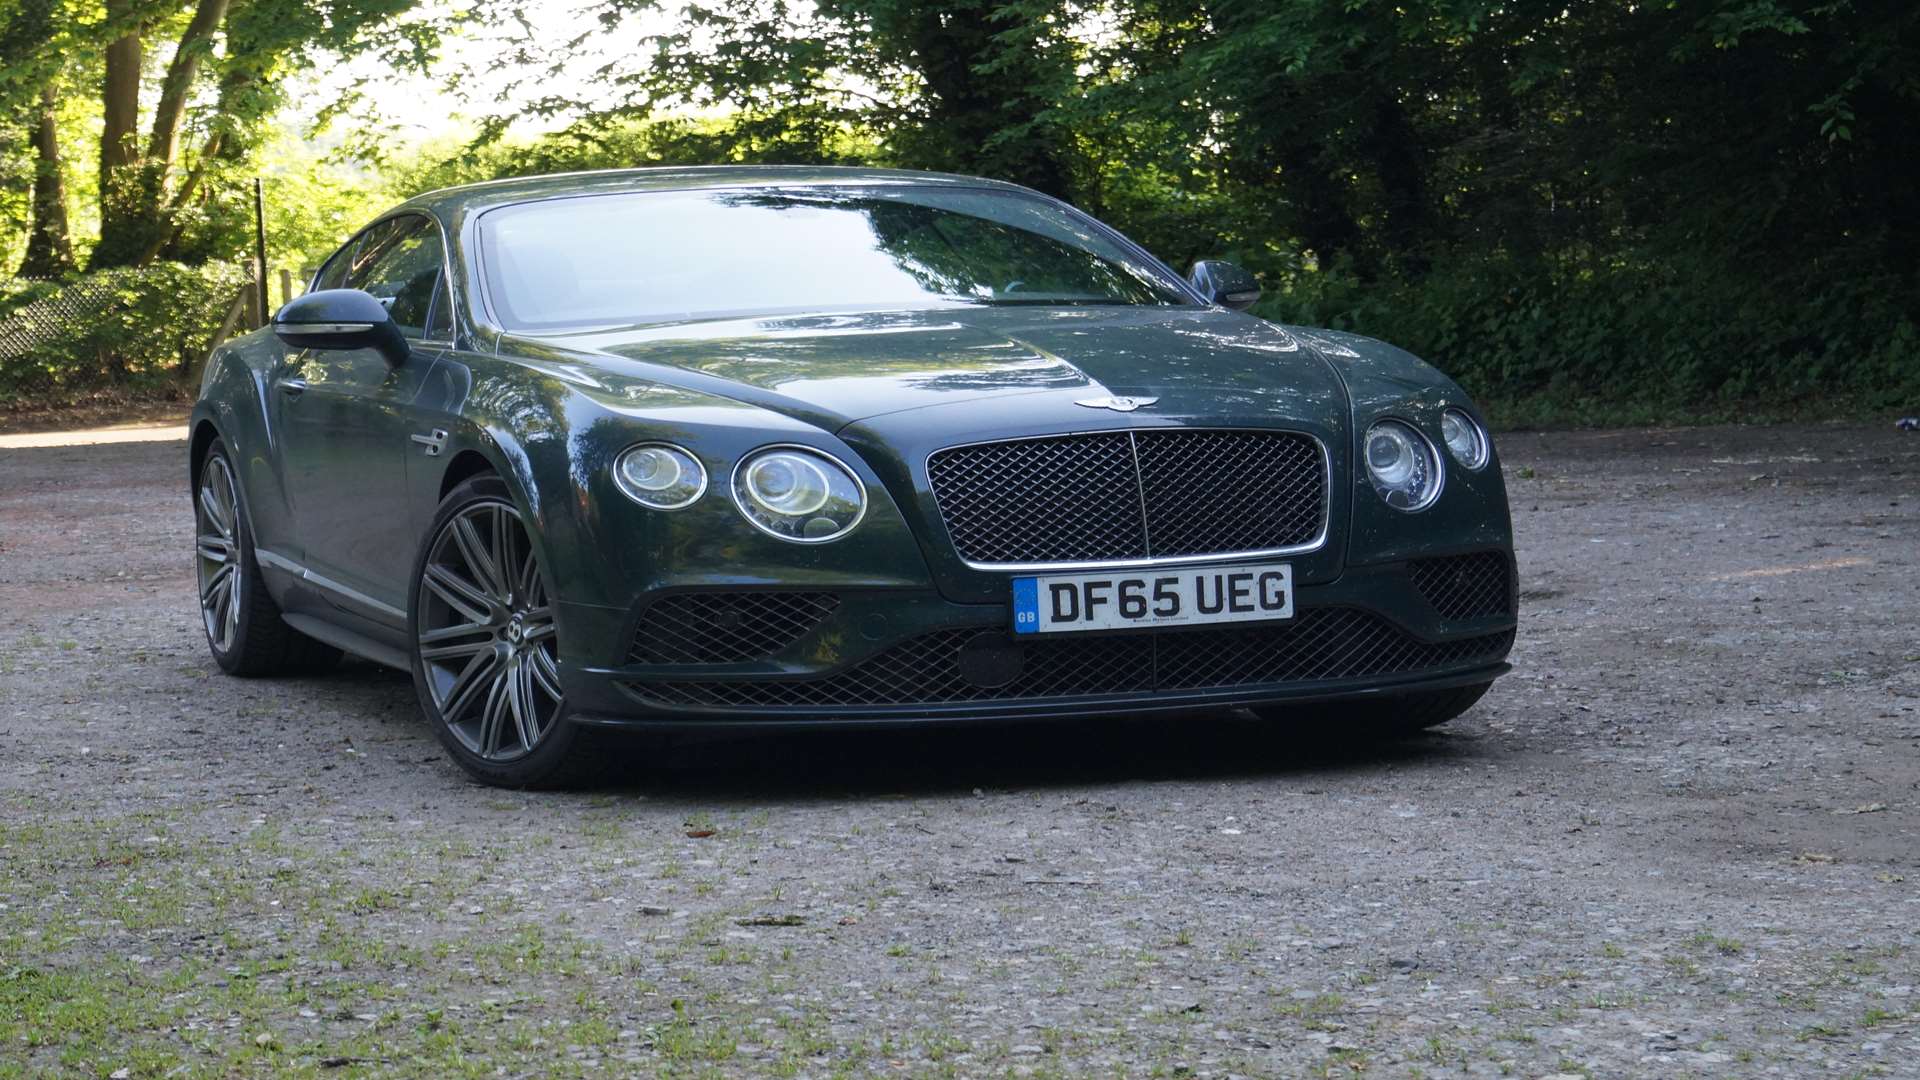 The Continental GT Speed is an automotive marvel